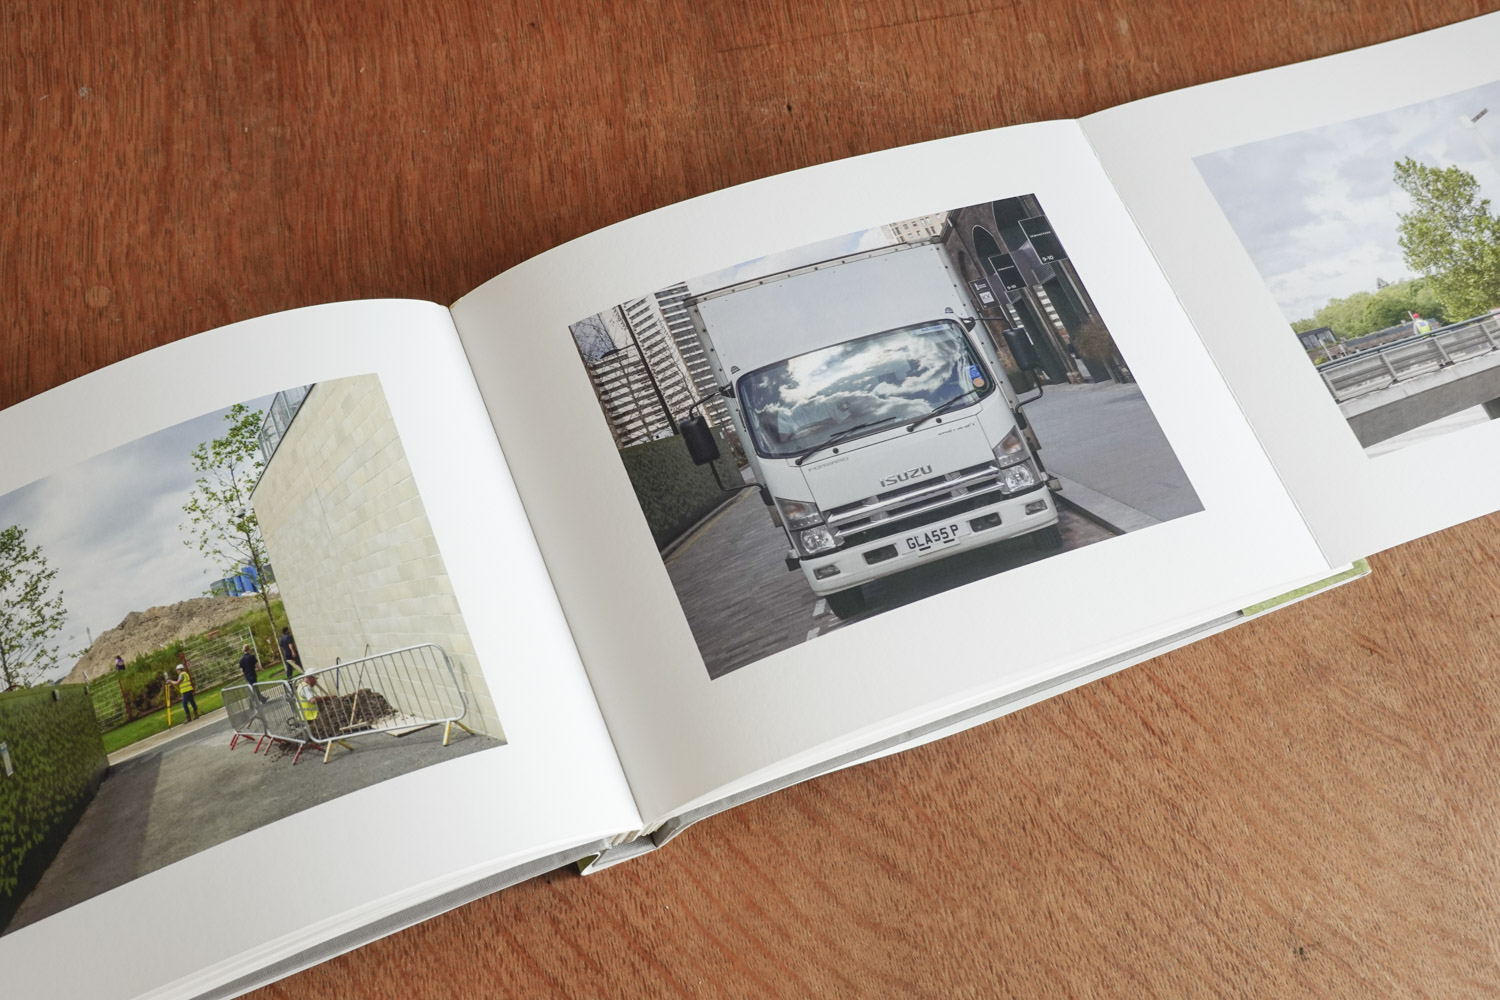 the open book displays three photos, the scene with the surveyor, a parked white van whose windscreen reflects a cloudy sky and the last photo is seen partially showing the edge of a bridge